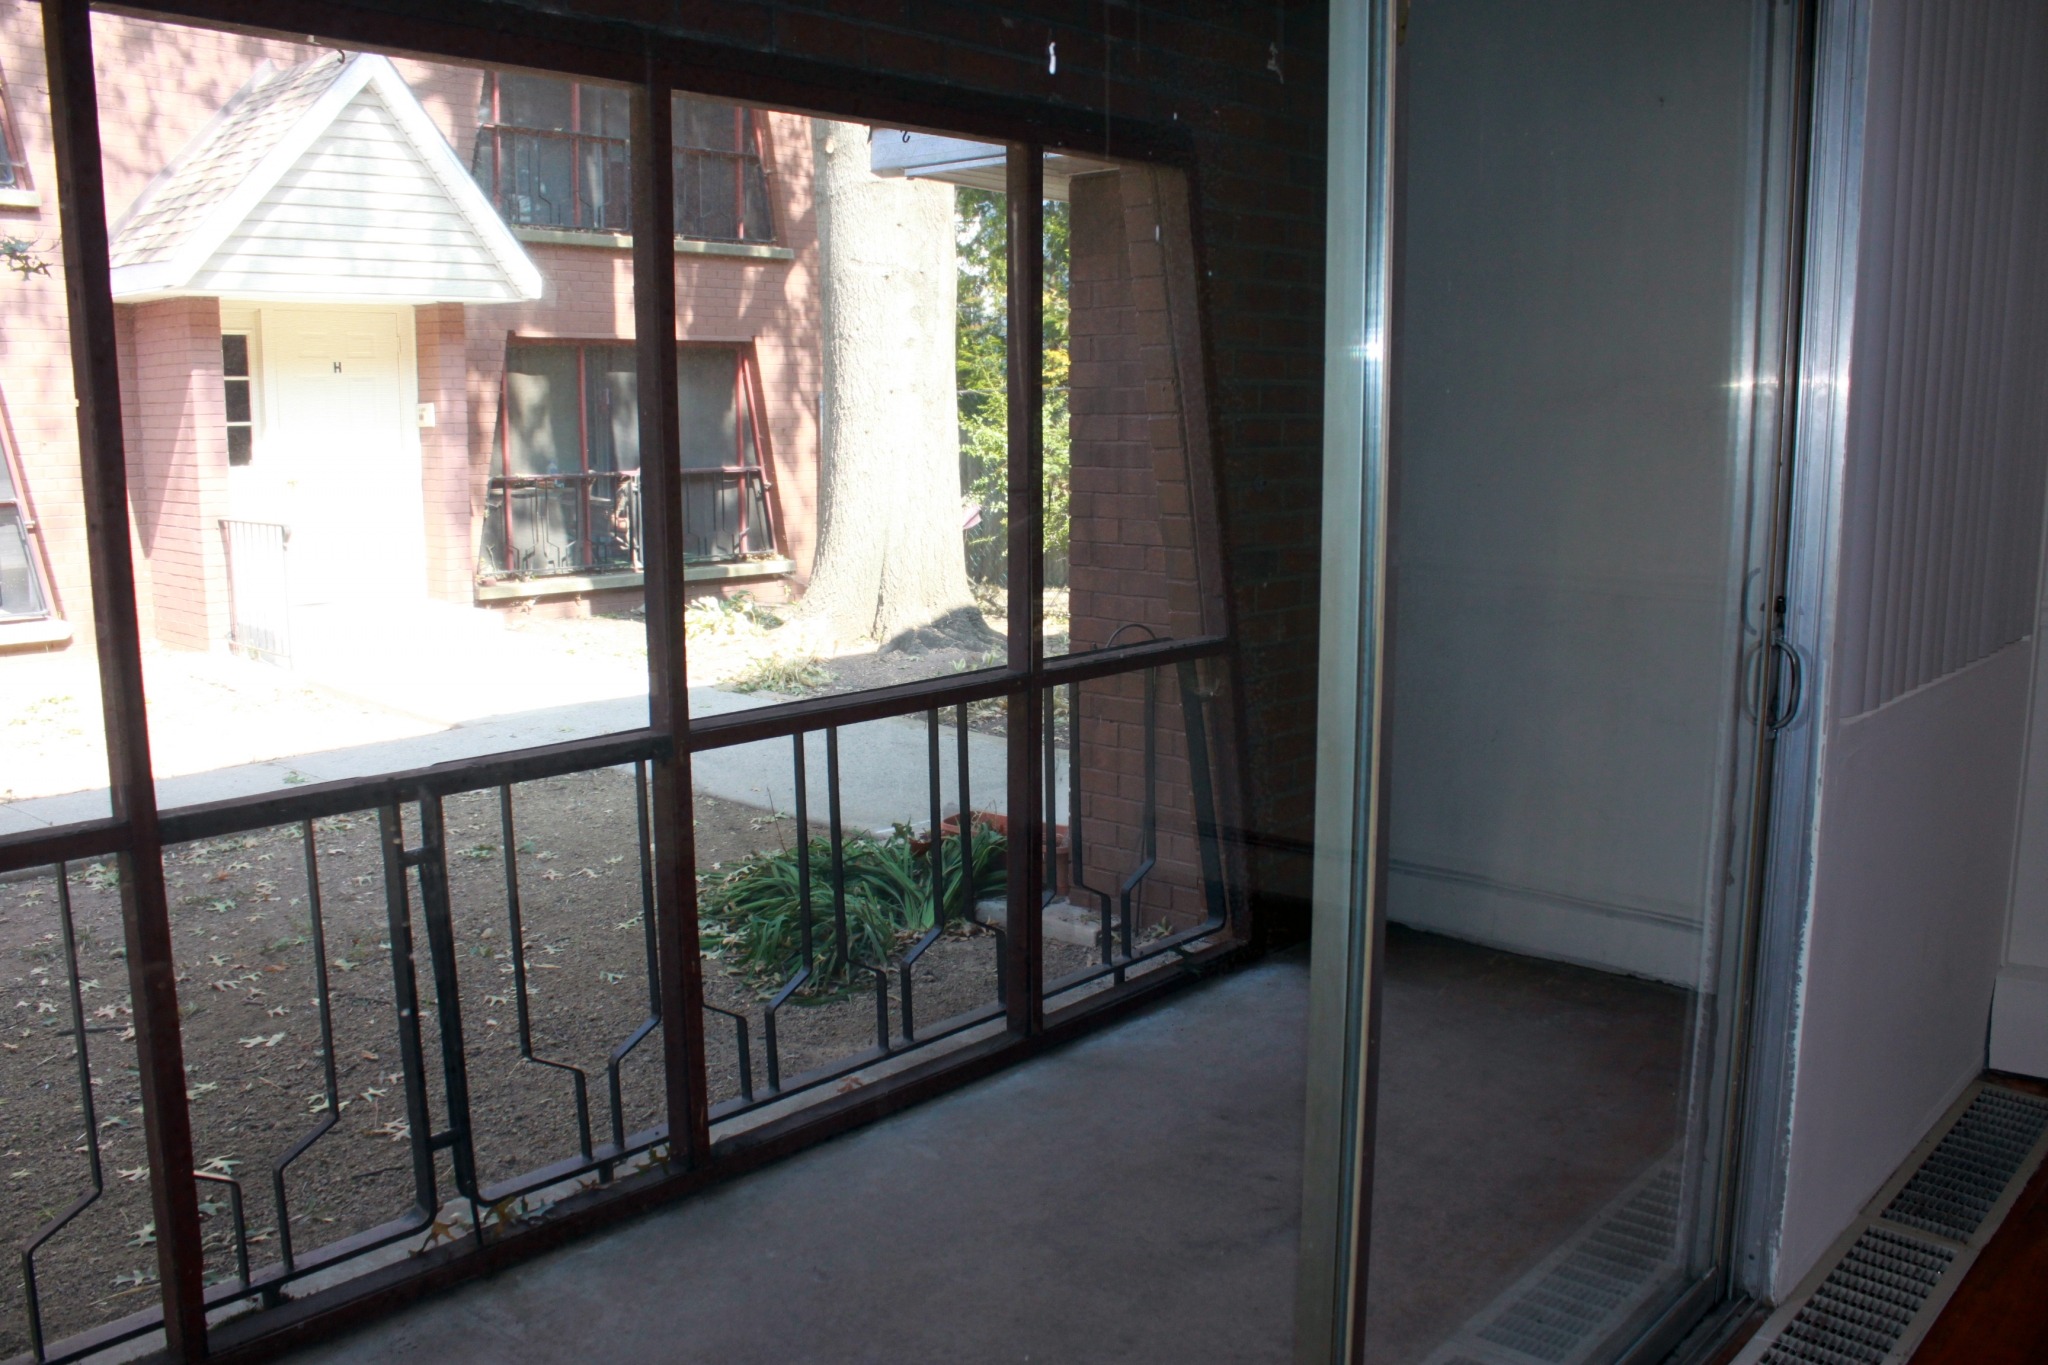 Sliding glass doors that lead to the patio with a view of the apartment buildings.